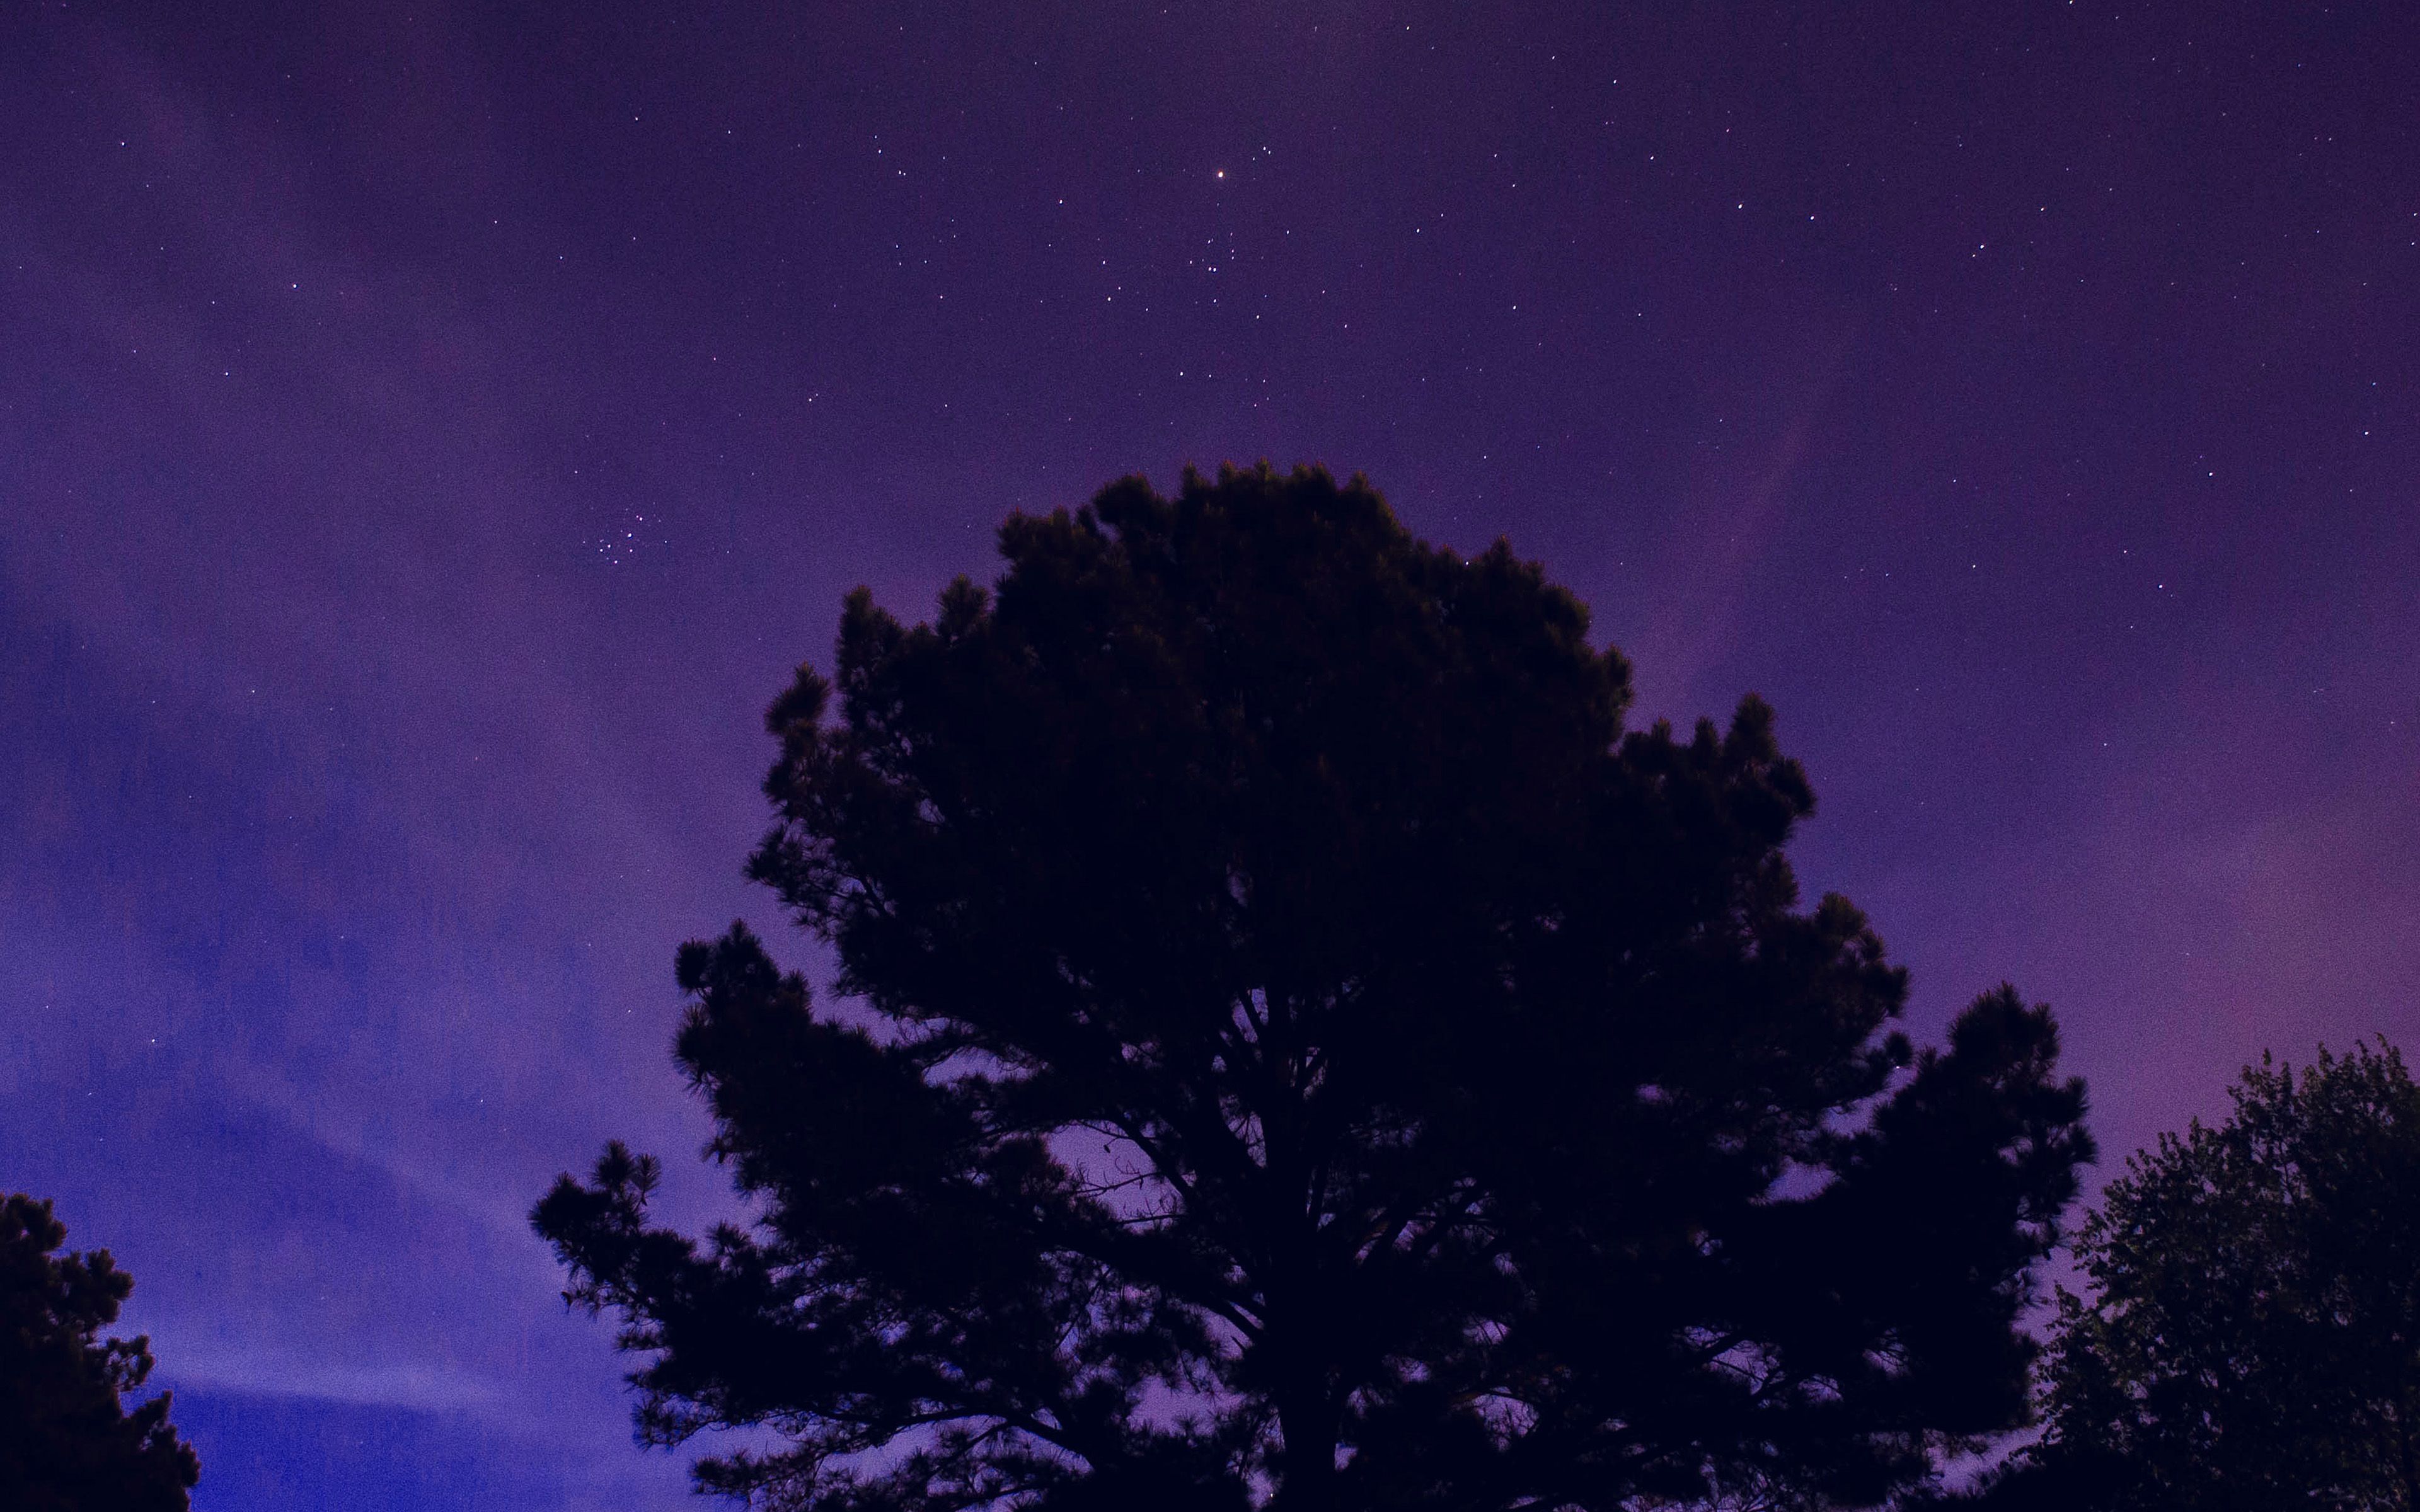 A purple sky with stars and a silhouette of a tree - Dark blue